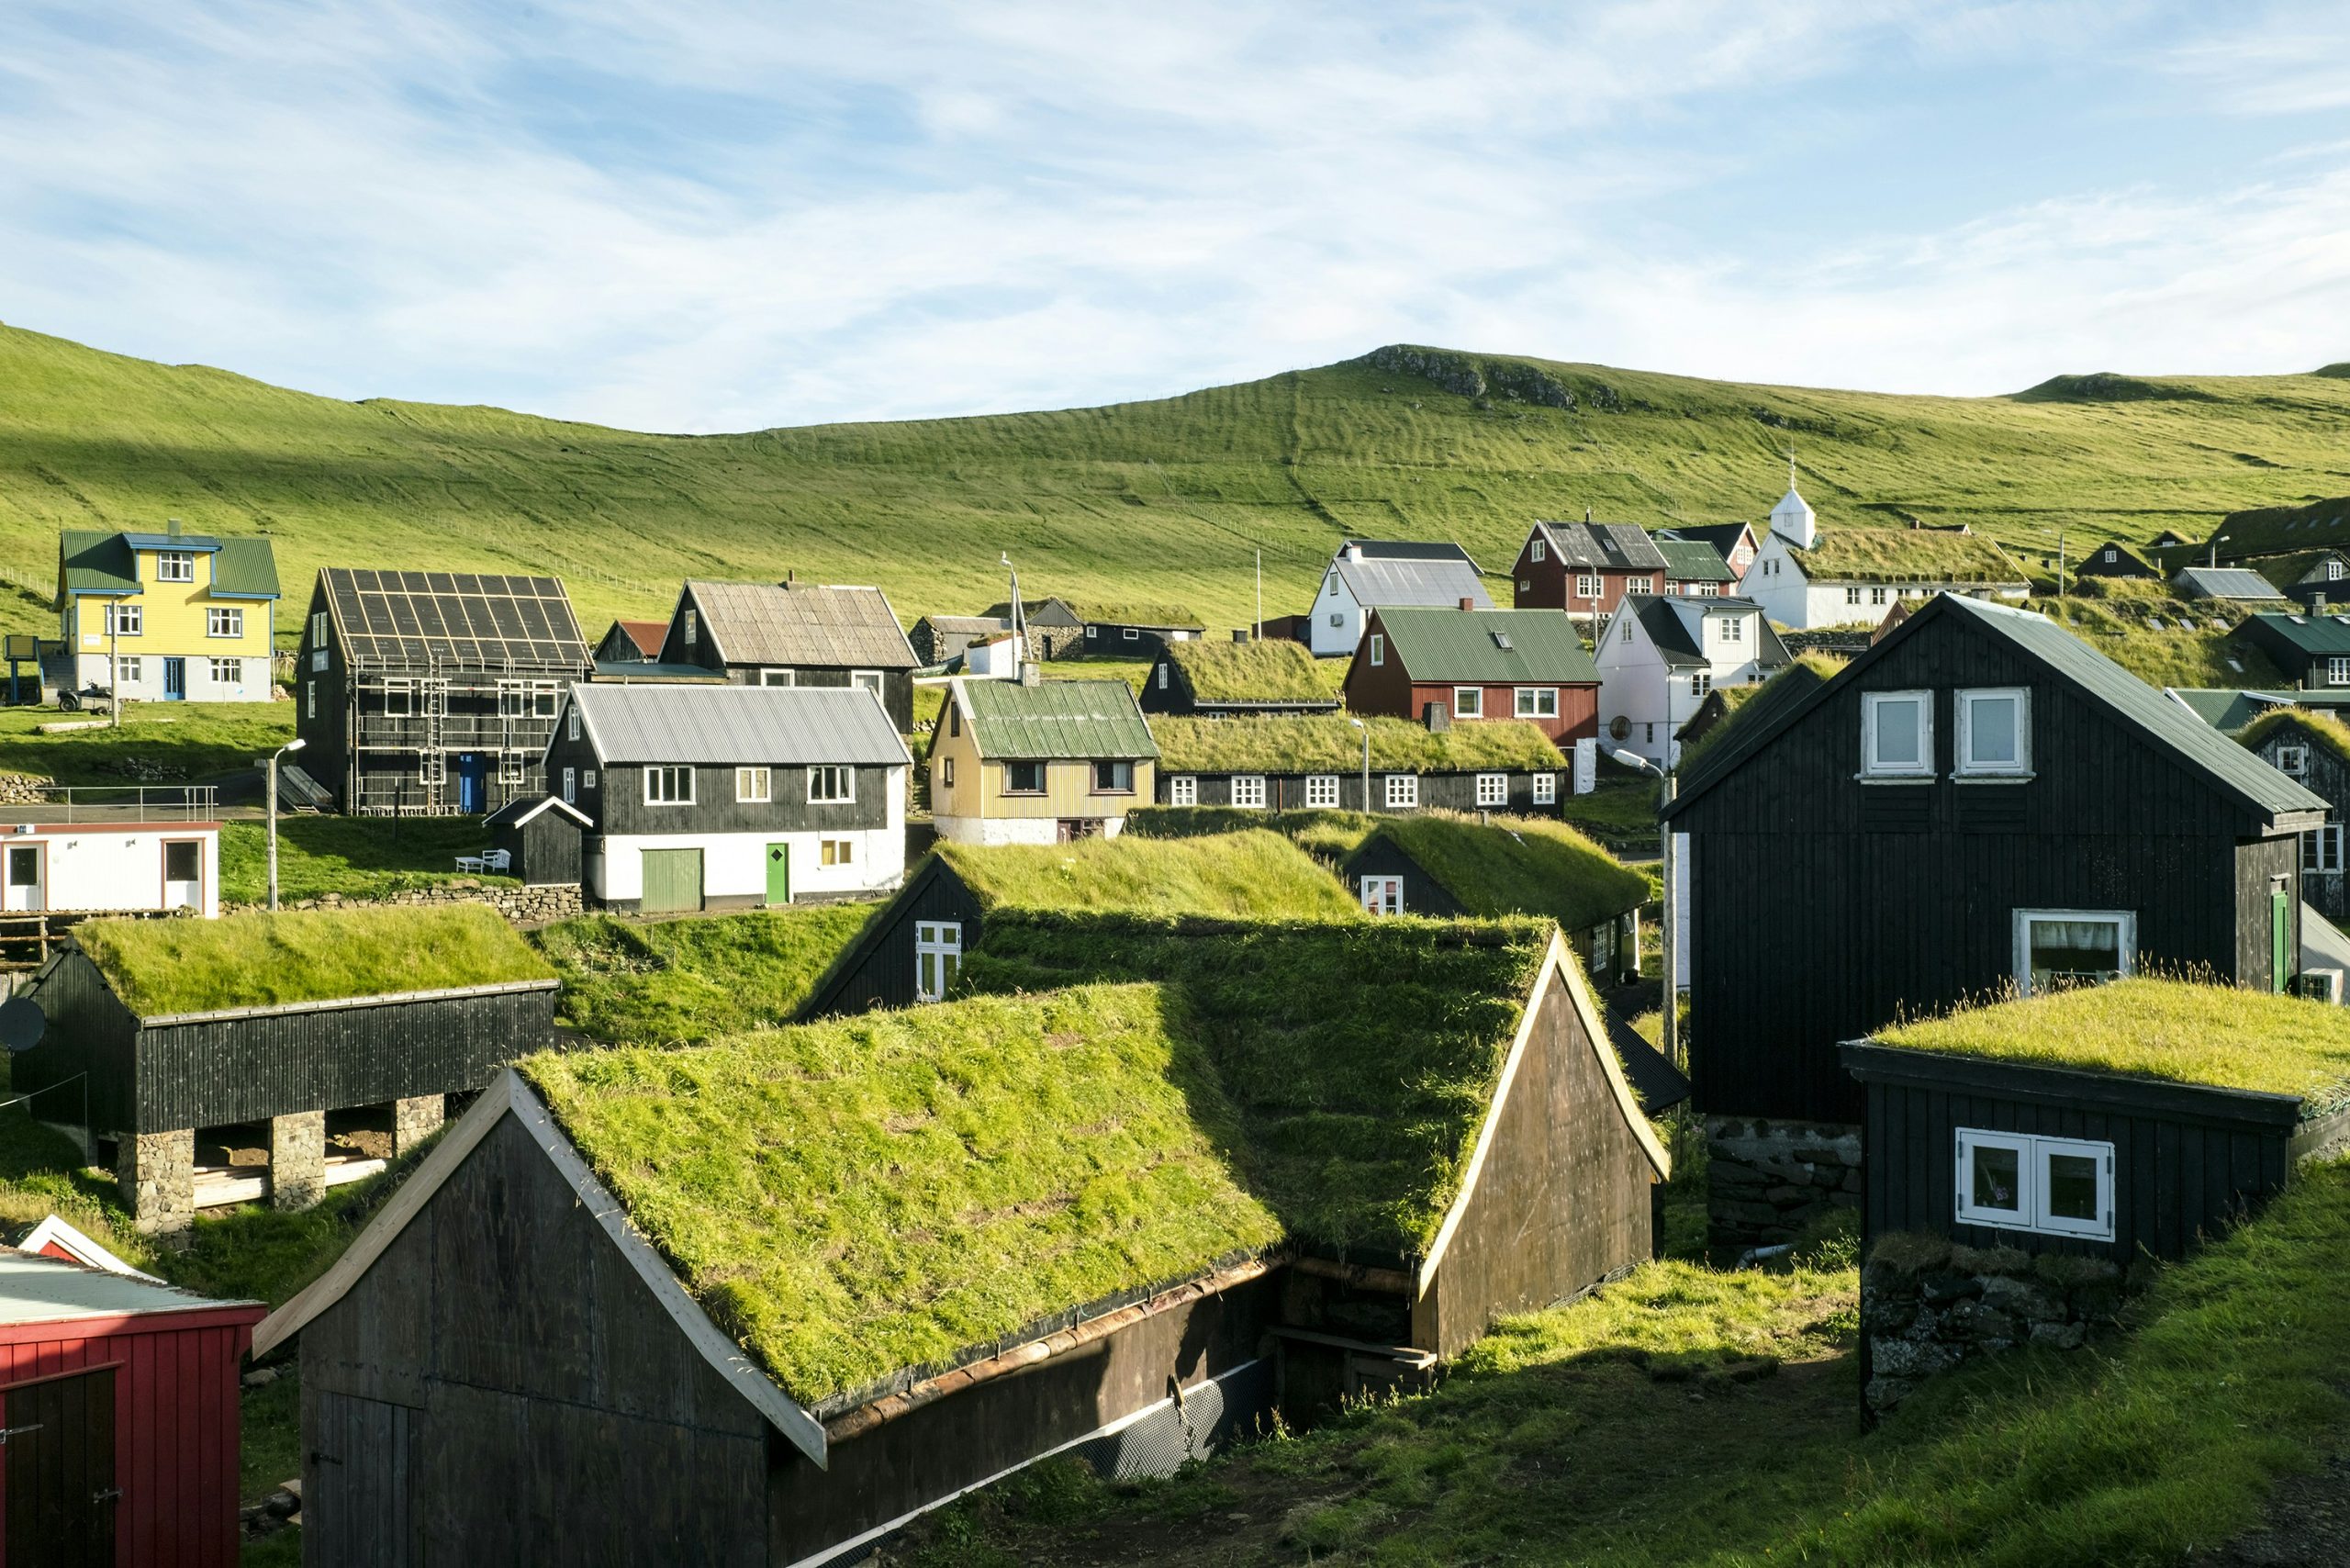 How Do Green Roofs Contribute To Sustainable Architecture?